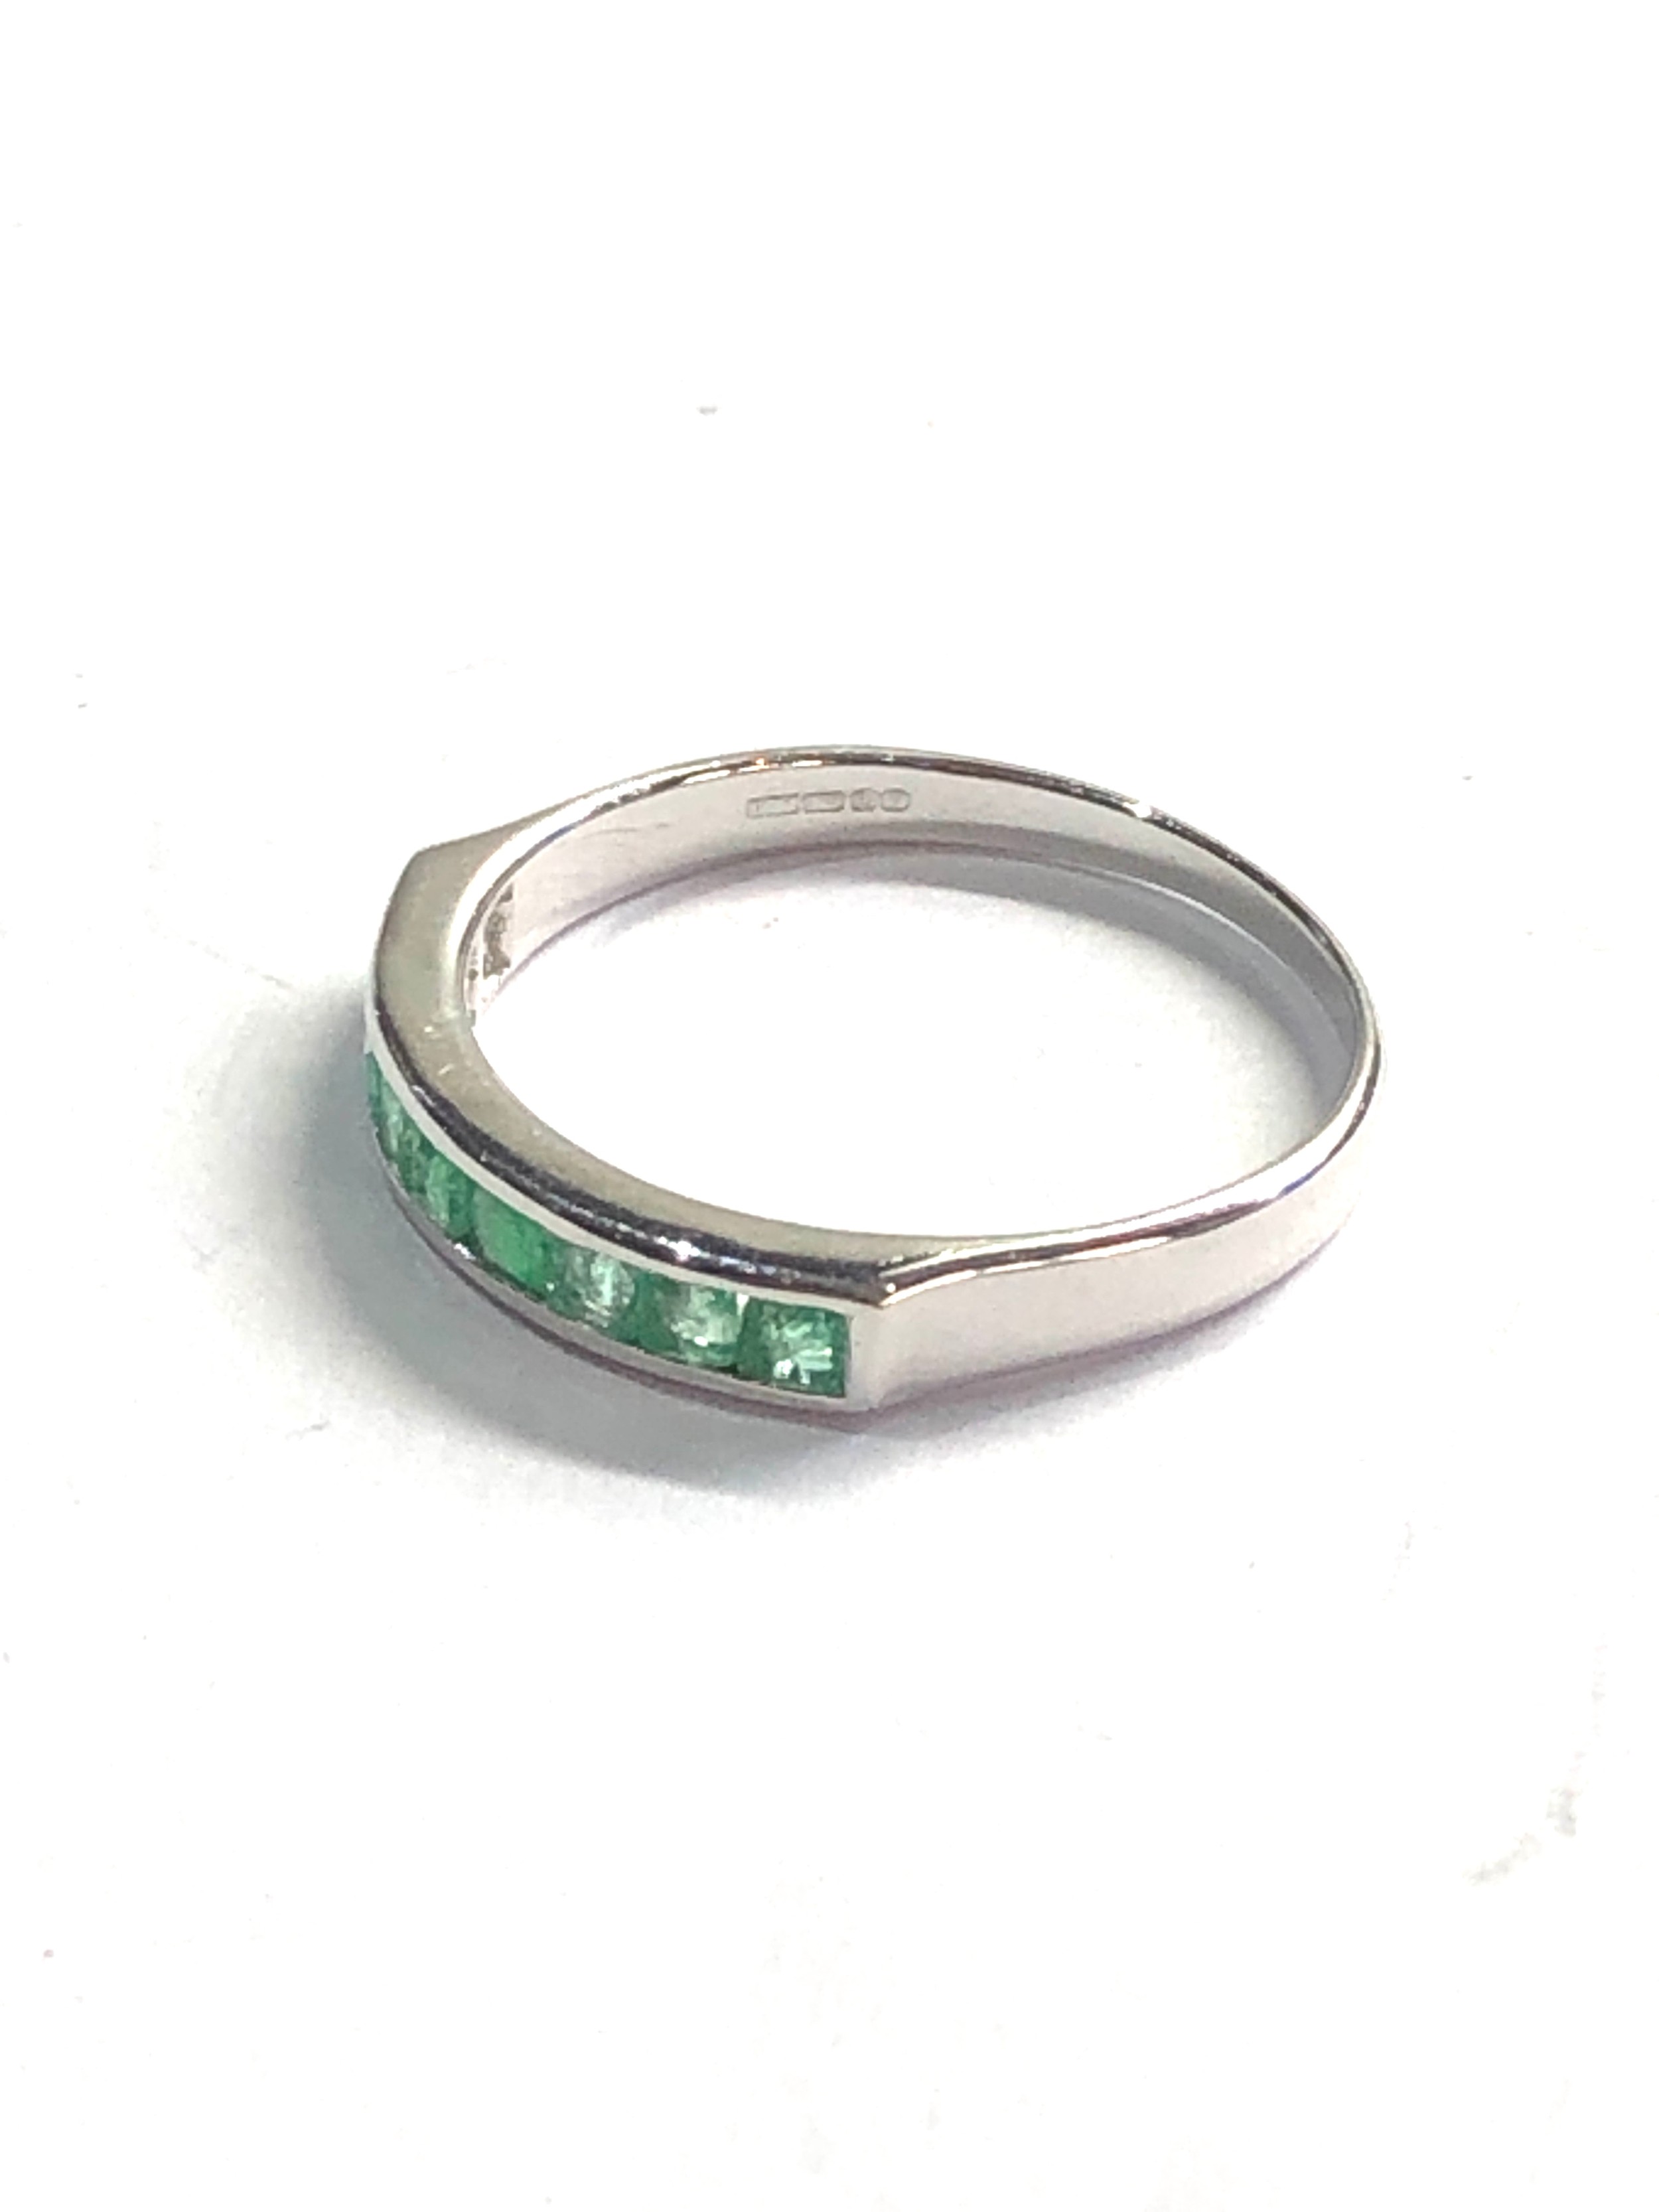 9ct white gold emerald half eternity ring (1.6g) - Image 2 of 2